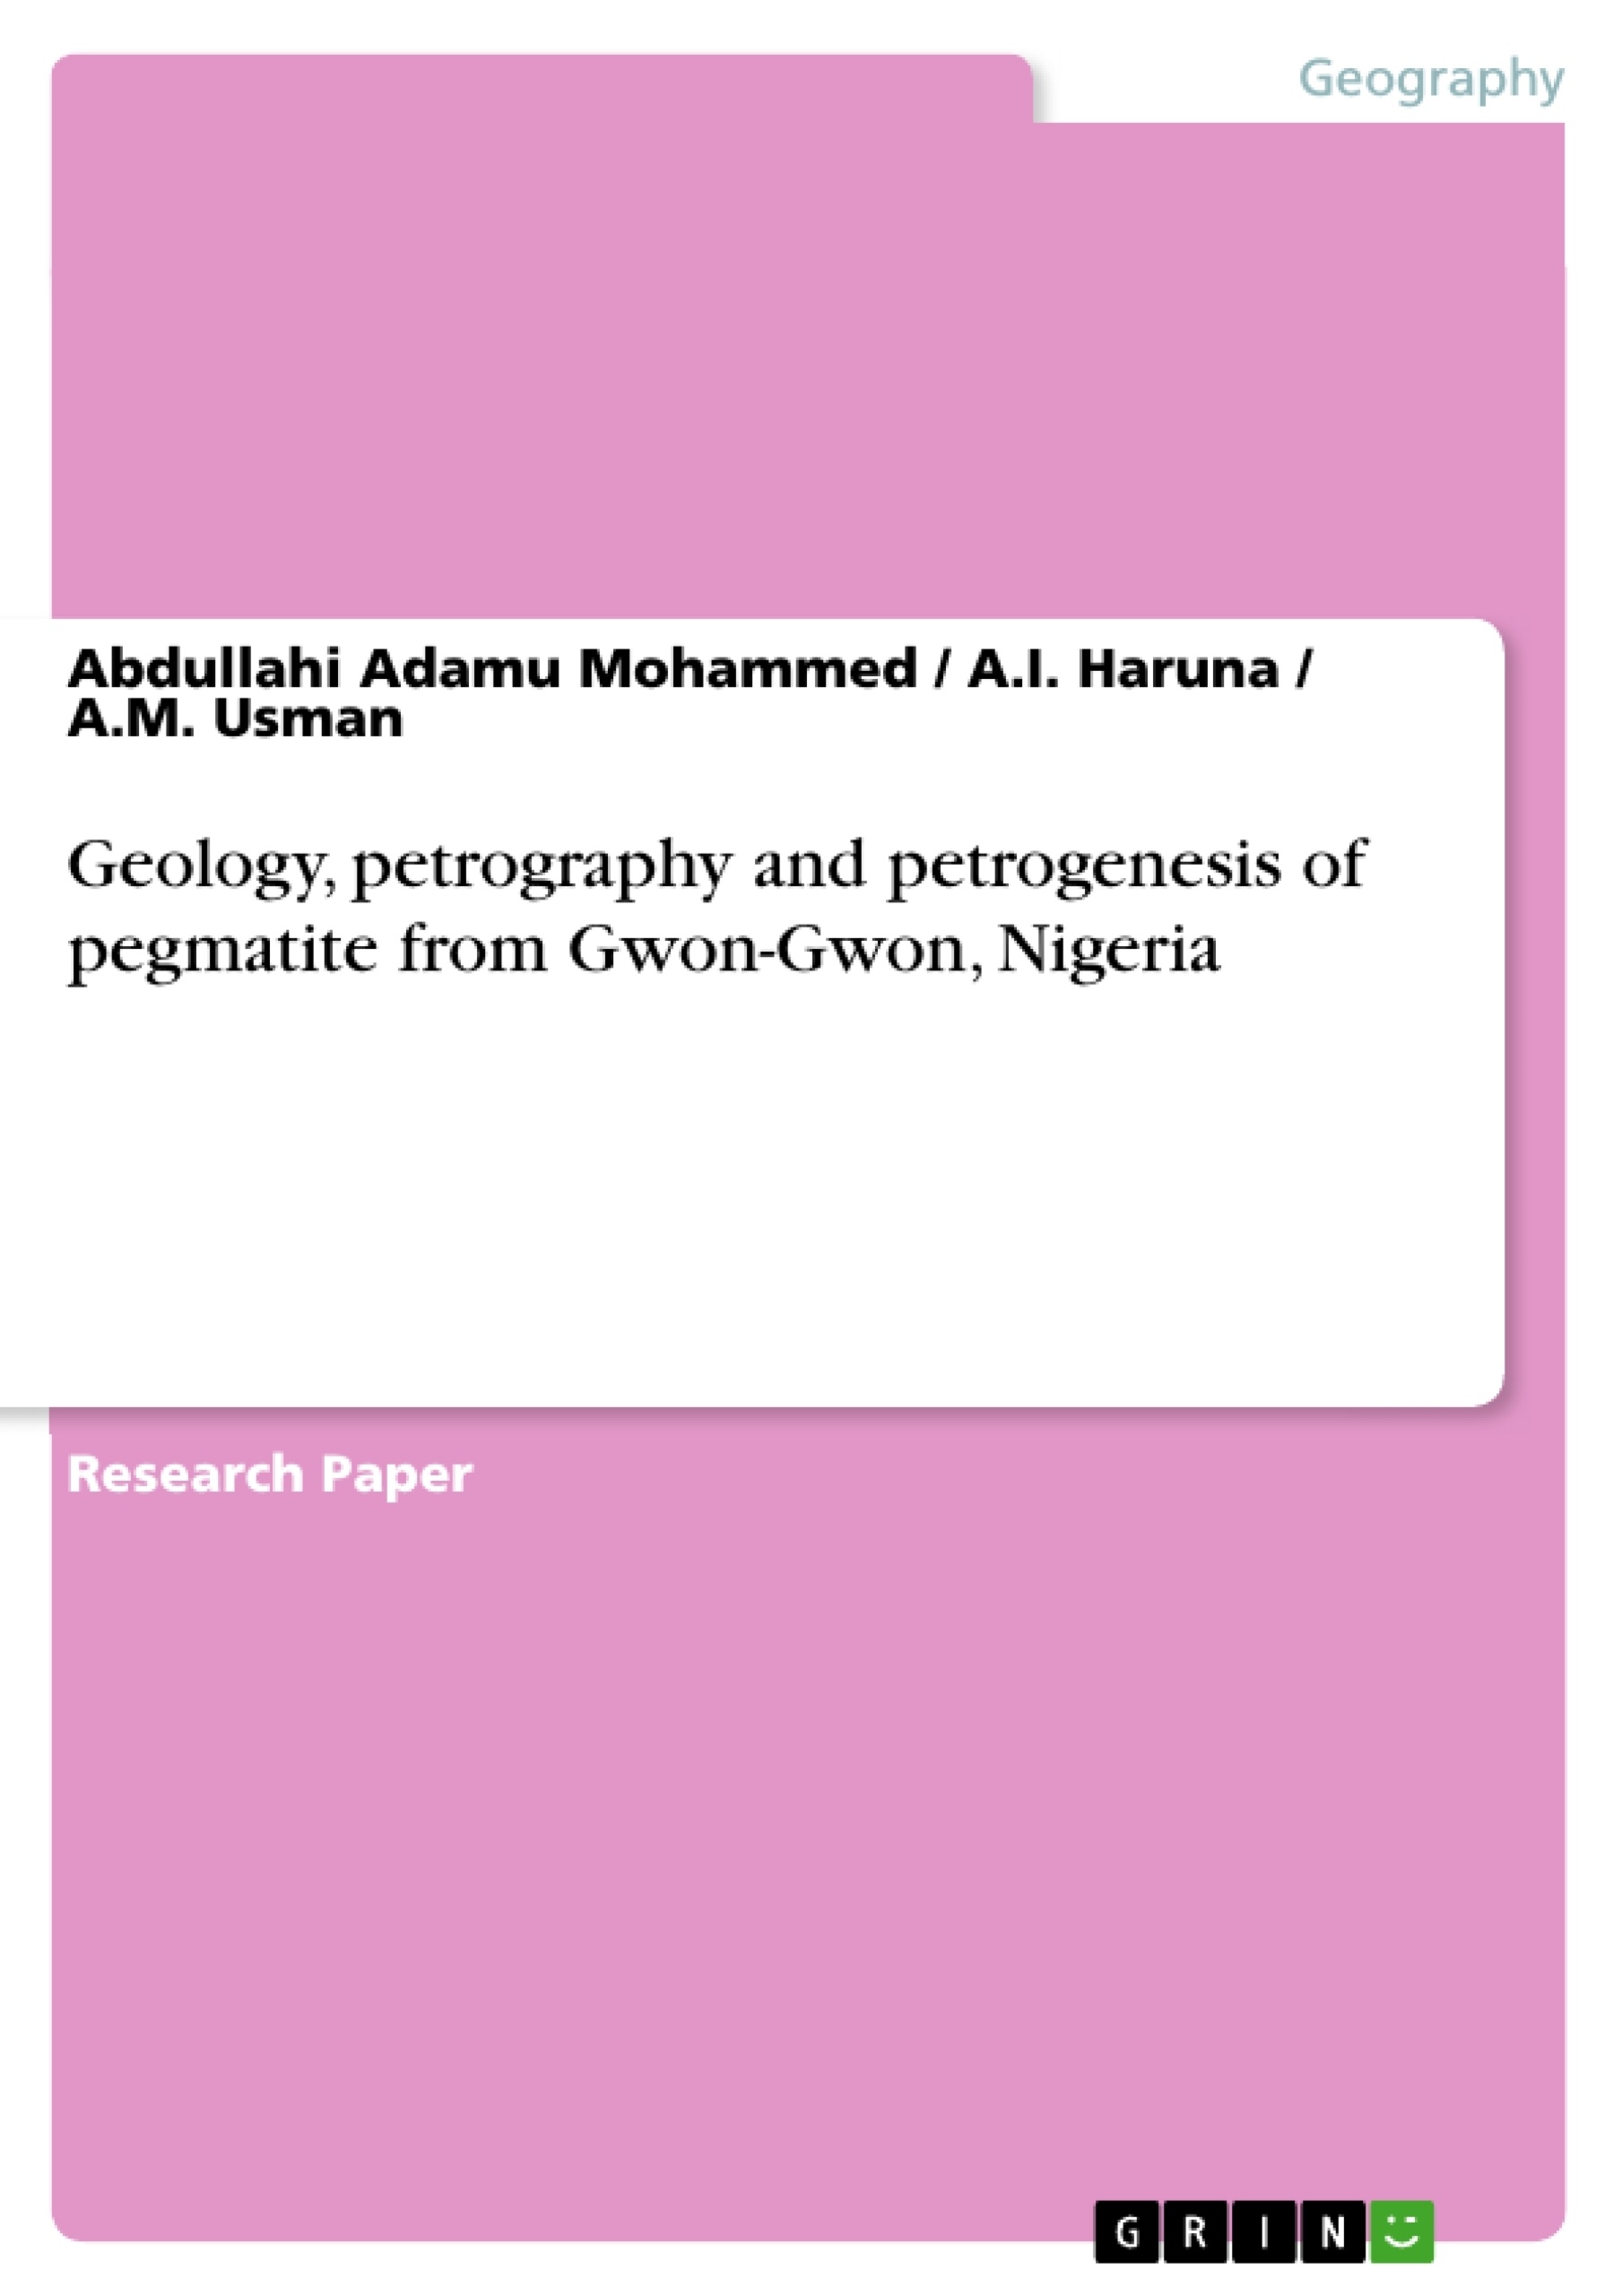 Título: Geology, petrography and petrogenesis of pegmatite from Gwon-Gwon, Nigeria